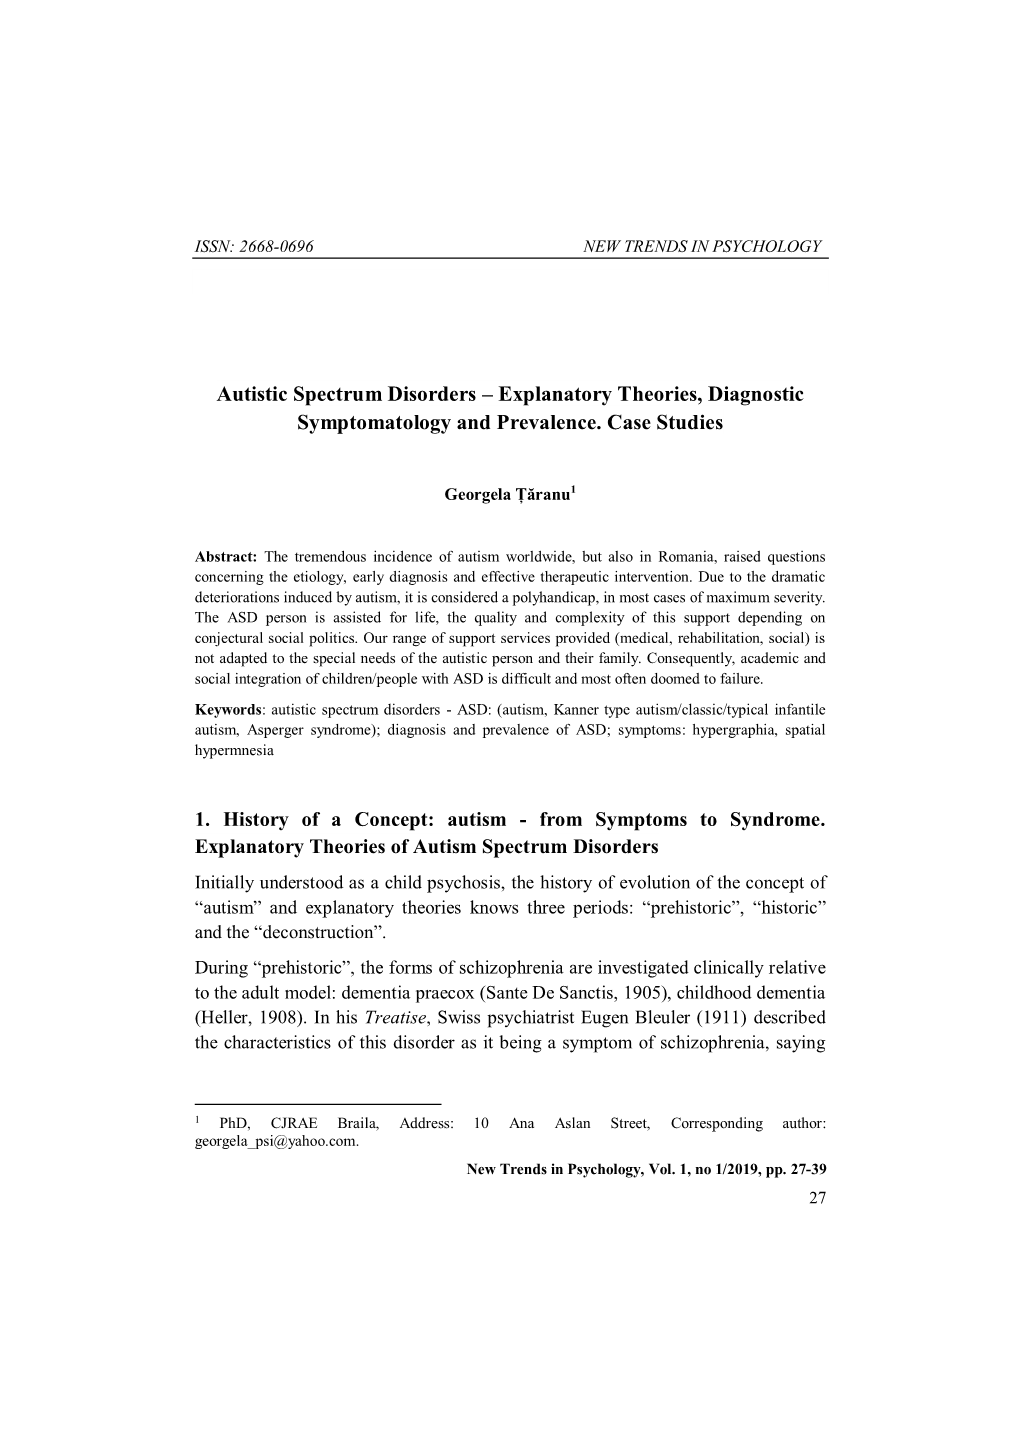 Autistic Spectrum Disorders – Explanatory Theories, Diagnostic Symptomatology and Prevalence